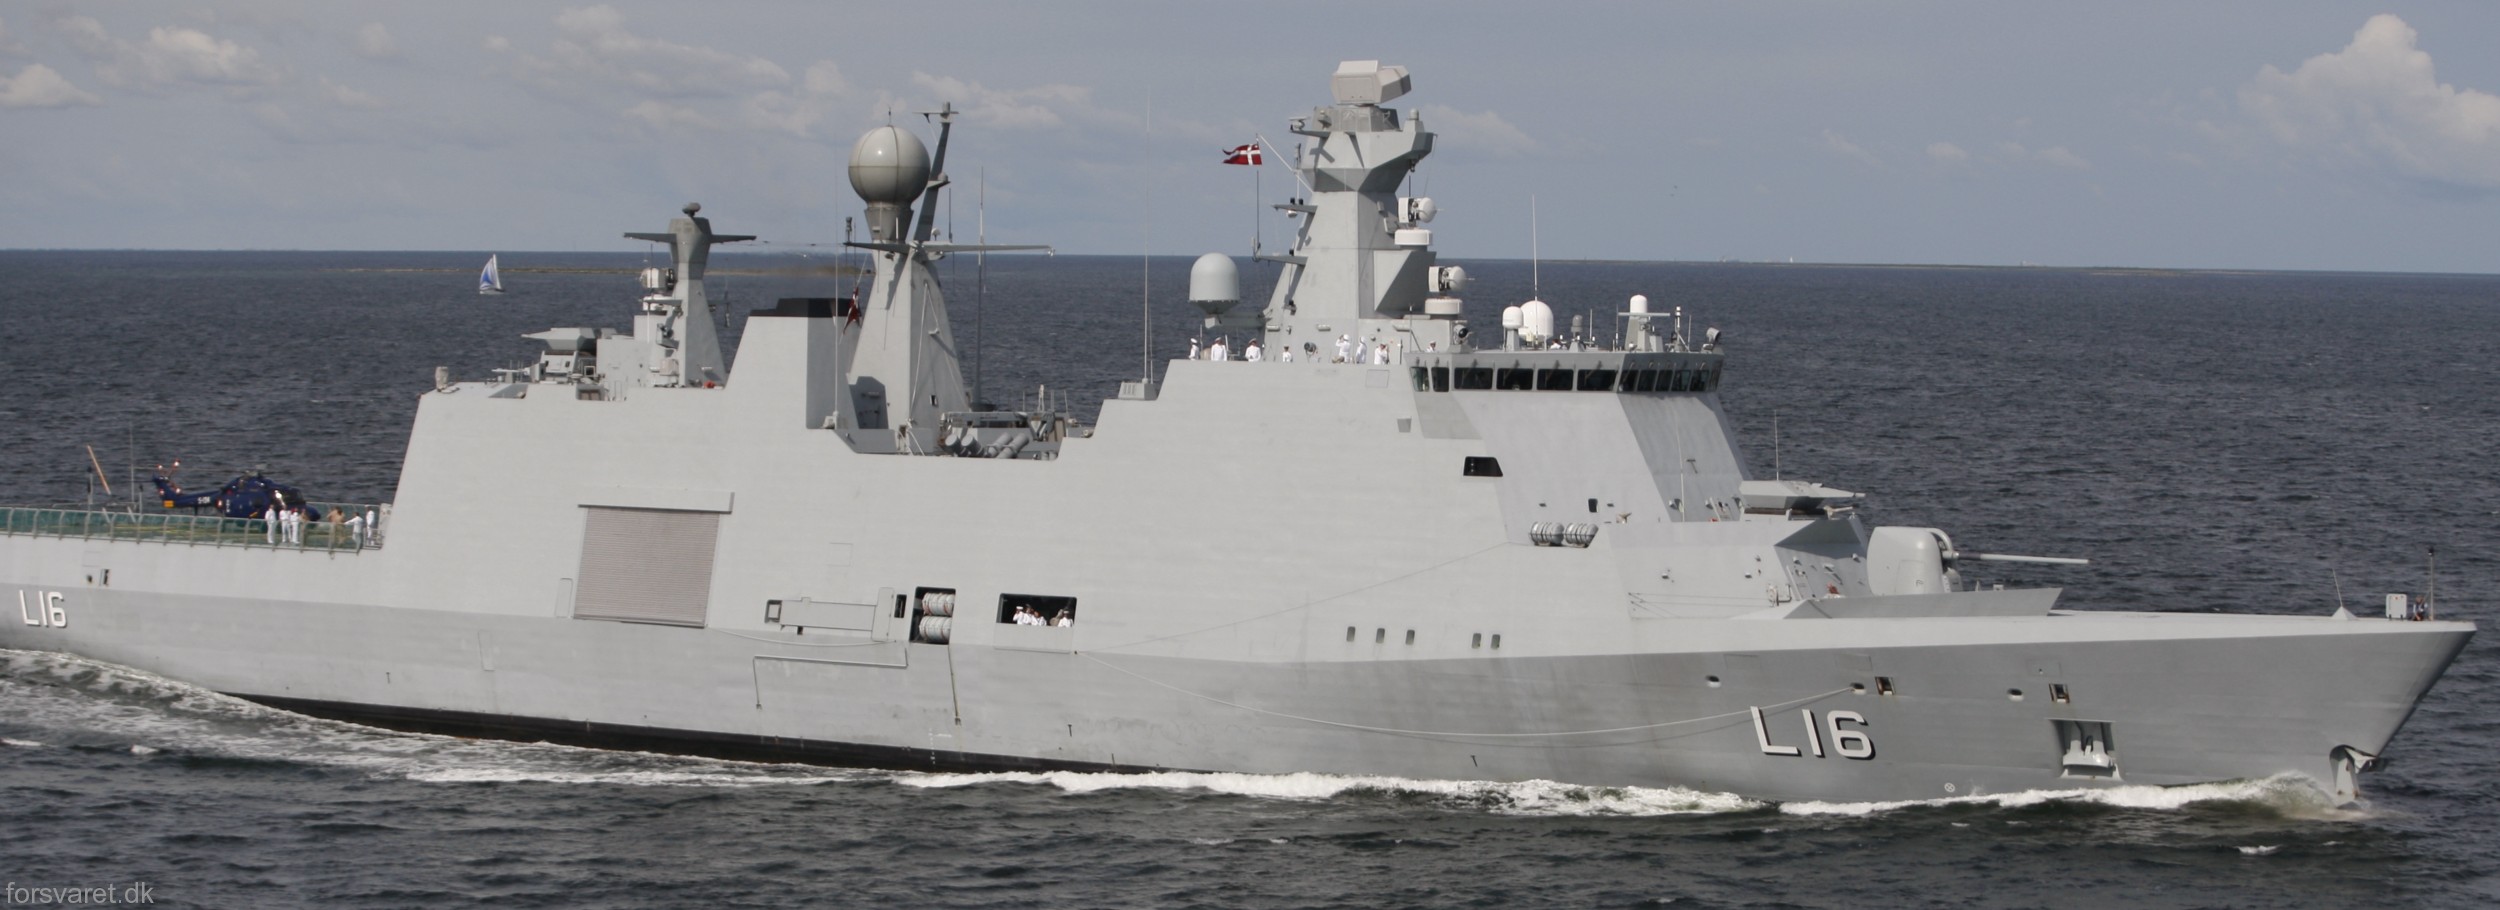 l-16 hdms absalon command support ship frigate royal danish navy 05